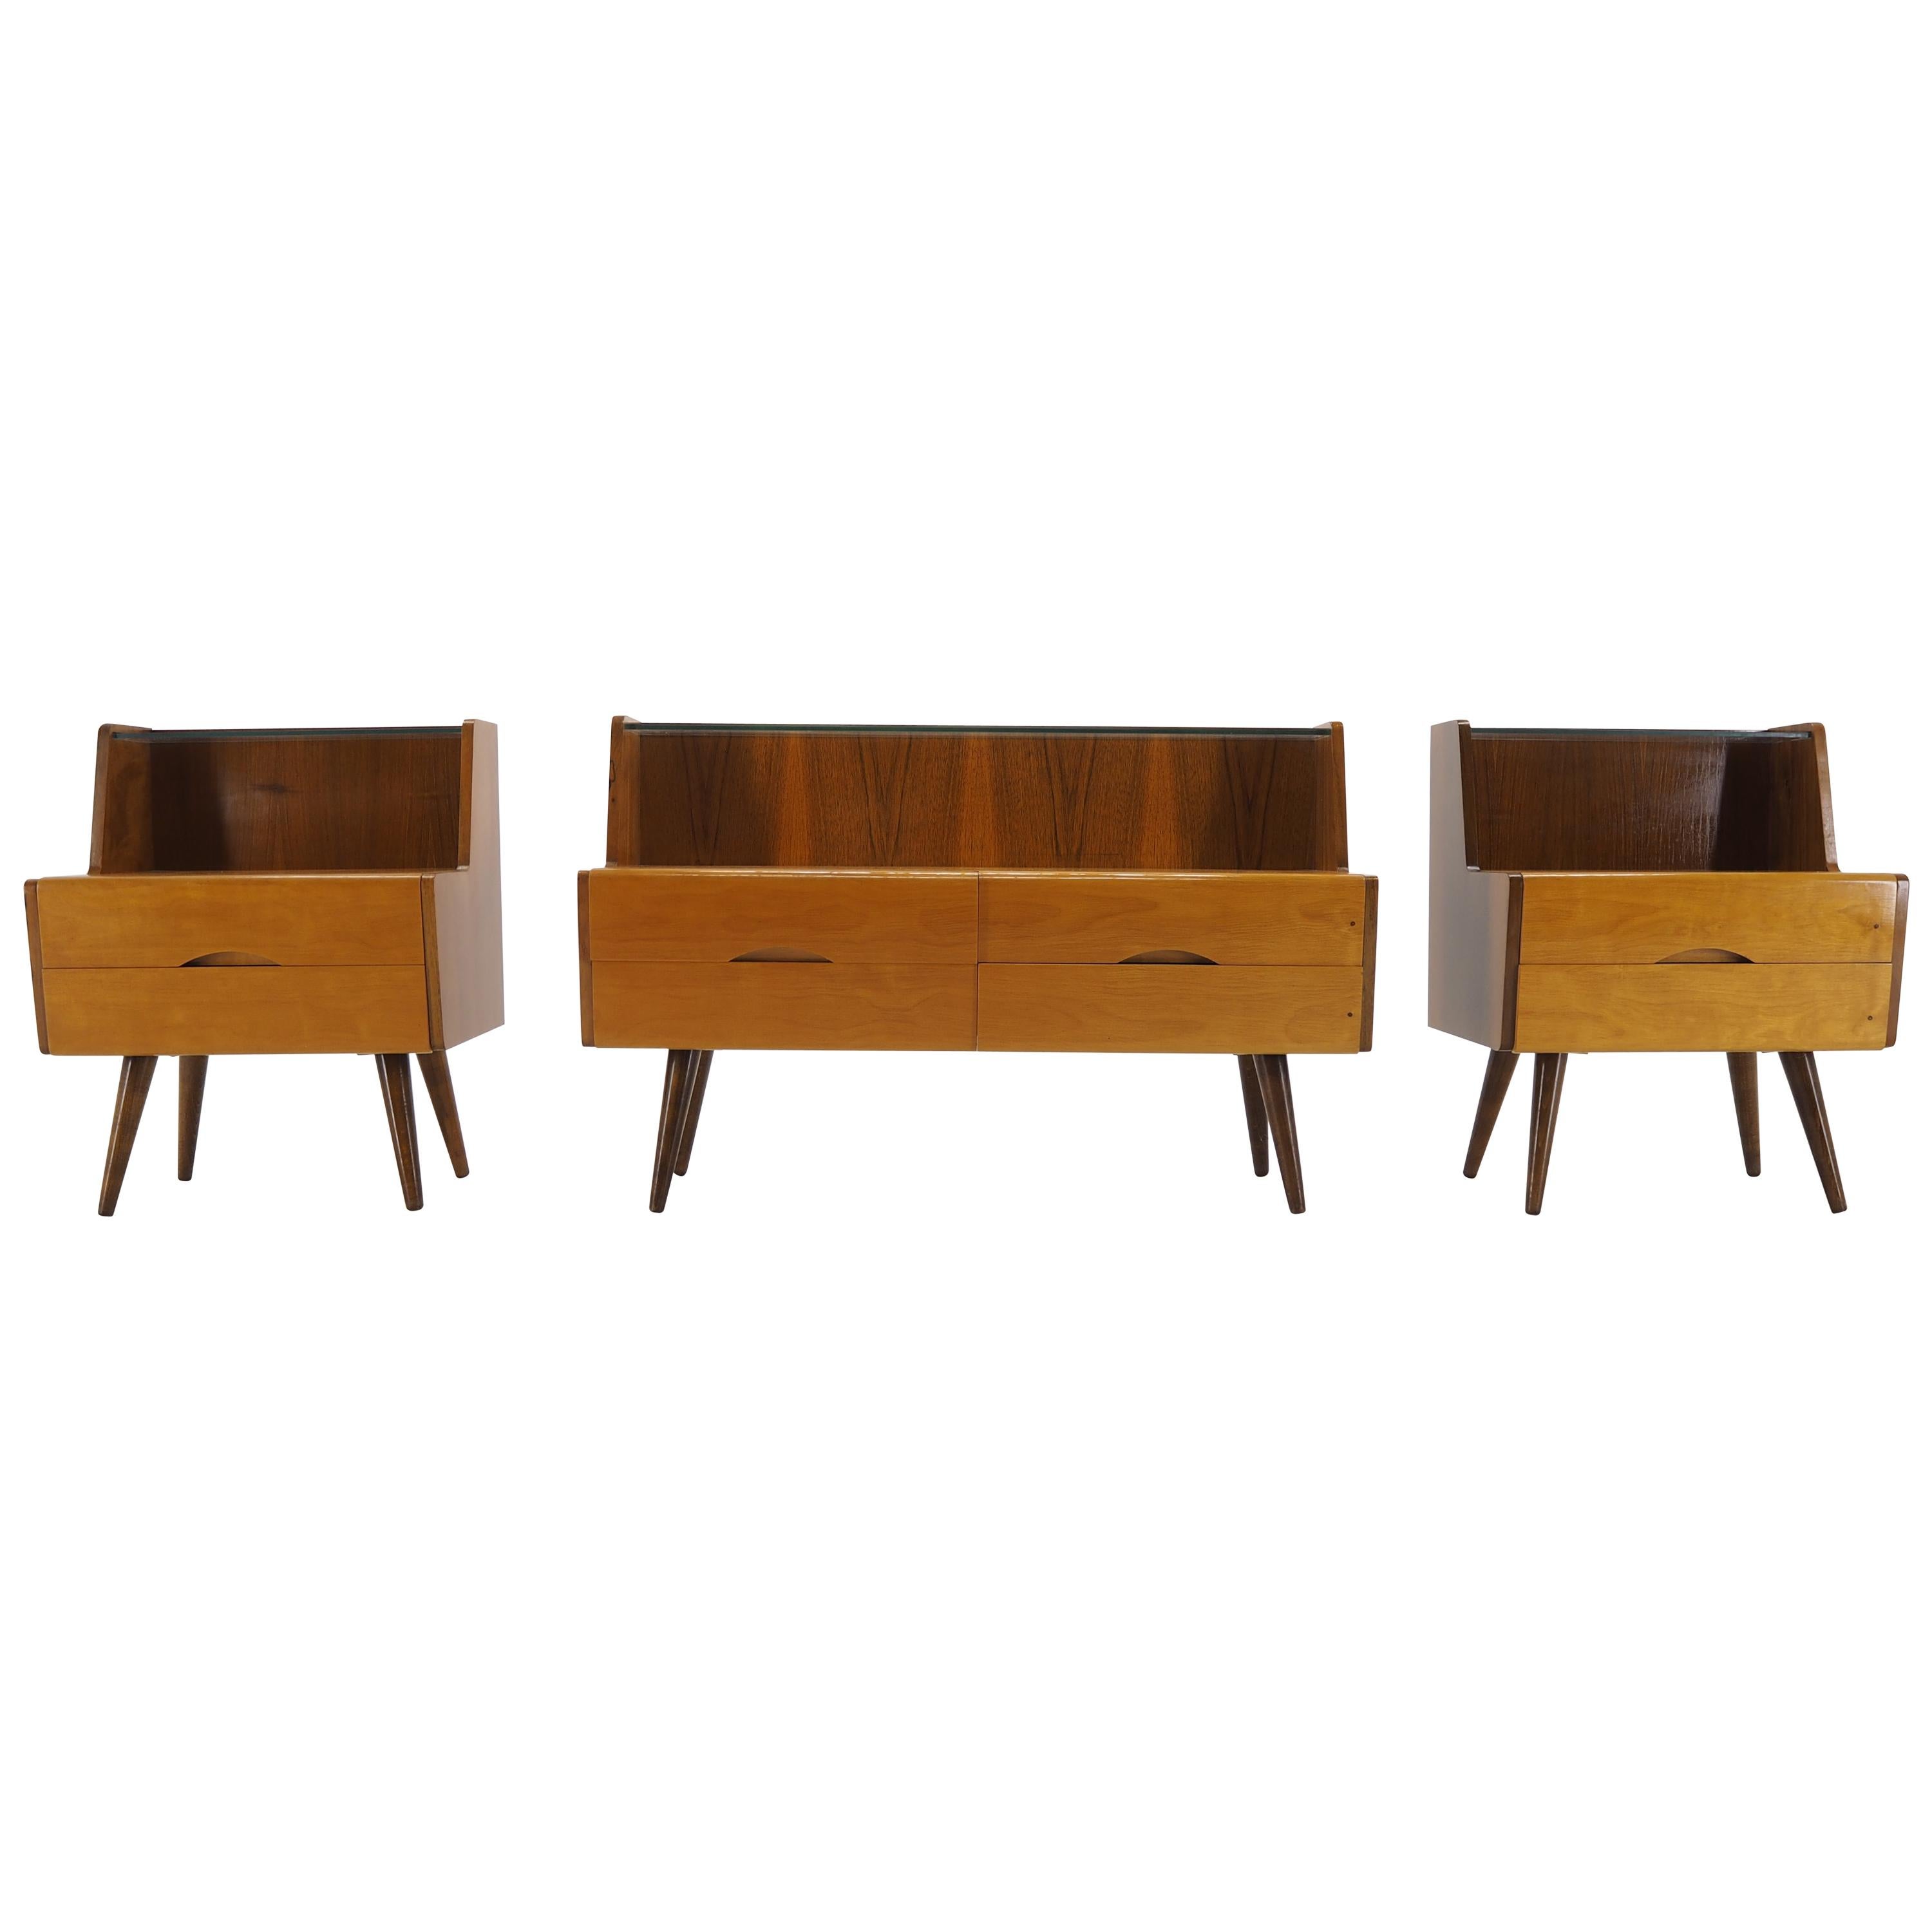 1960s Set of Three Bed Side Tables in Brussels Style, Czechoslovakia